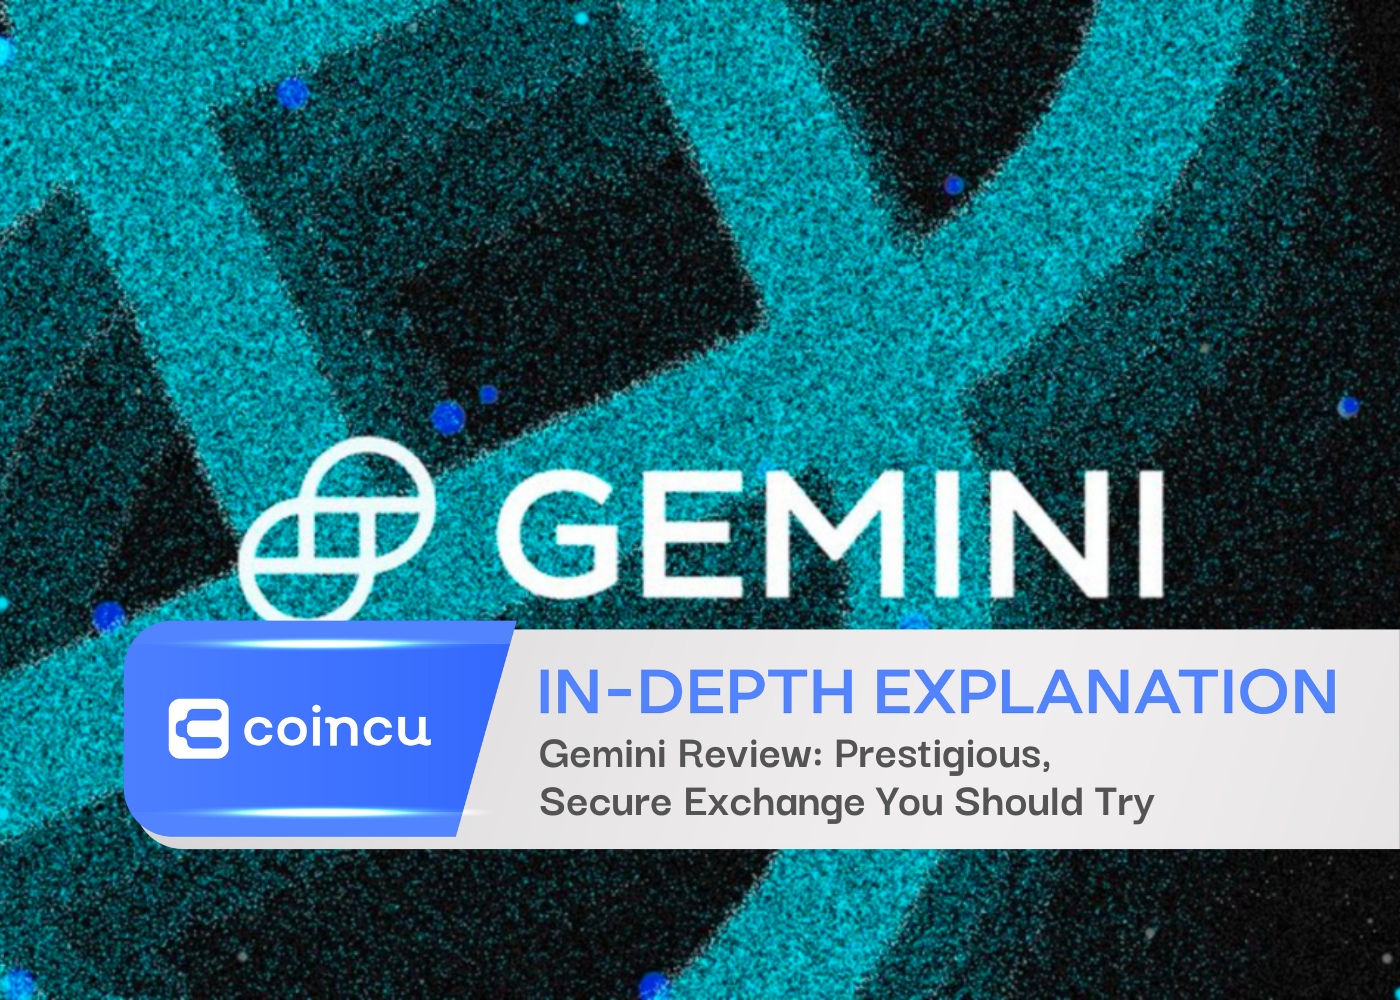 Gemini Review: Prestigious, Secure Exchange You Should Try